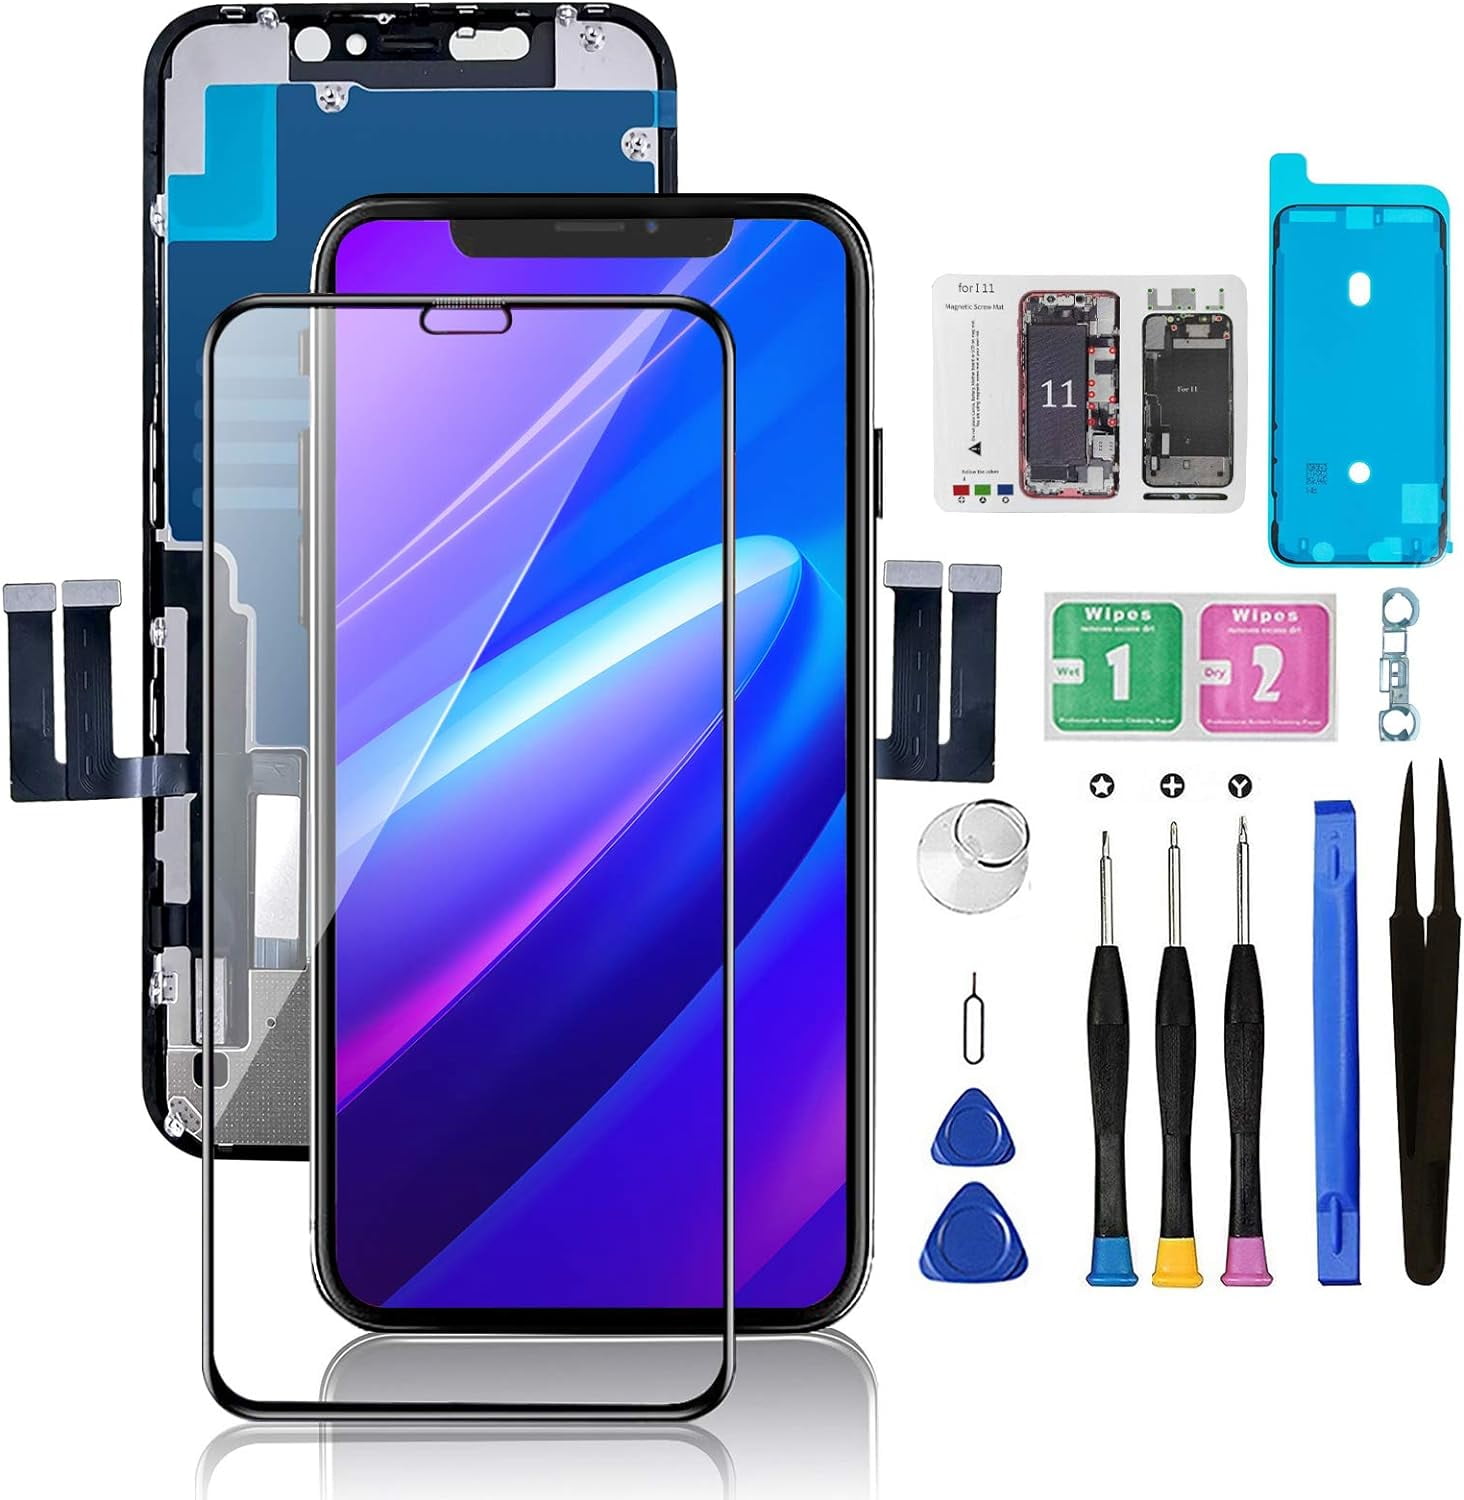  for iPhone 11 Pro LCD Screen Replacement Screen Touch LCD  Display Digitizer Assembly Touch Screen and Frame, Repair Tool Kit with  Tempered Glass (11 Pro LCD) : Cell Phones & Accessories